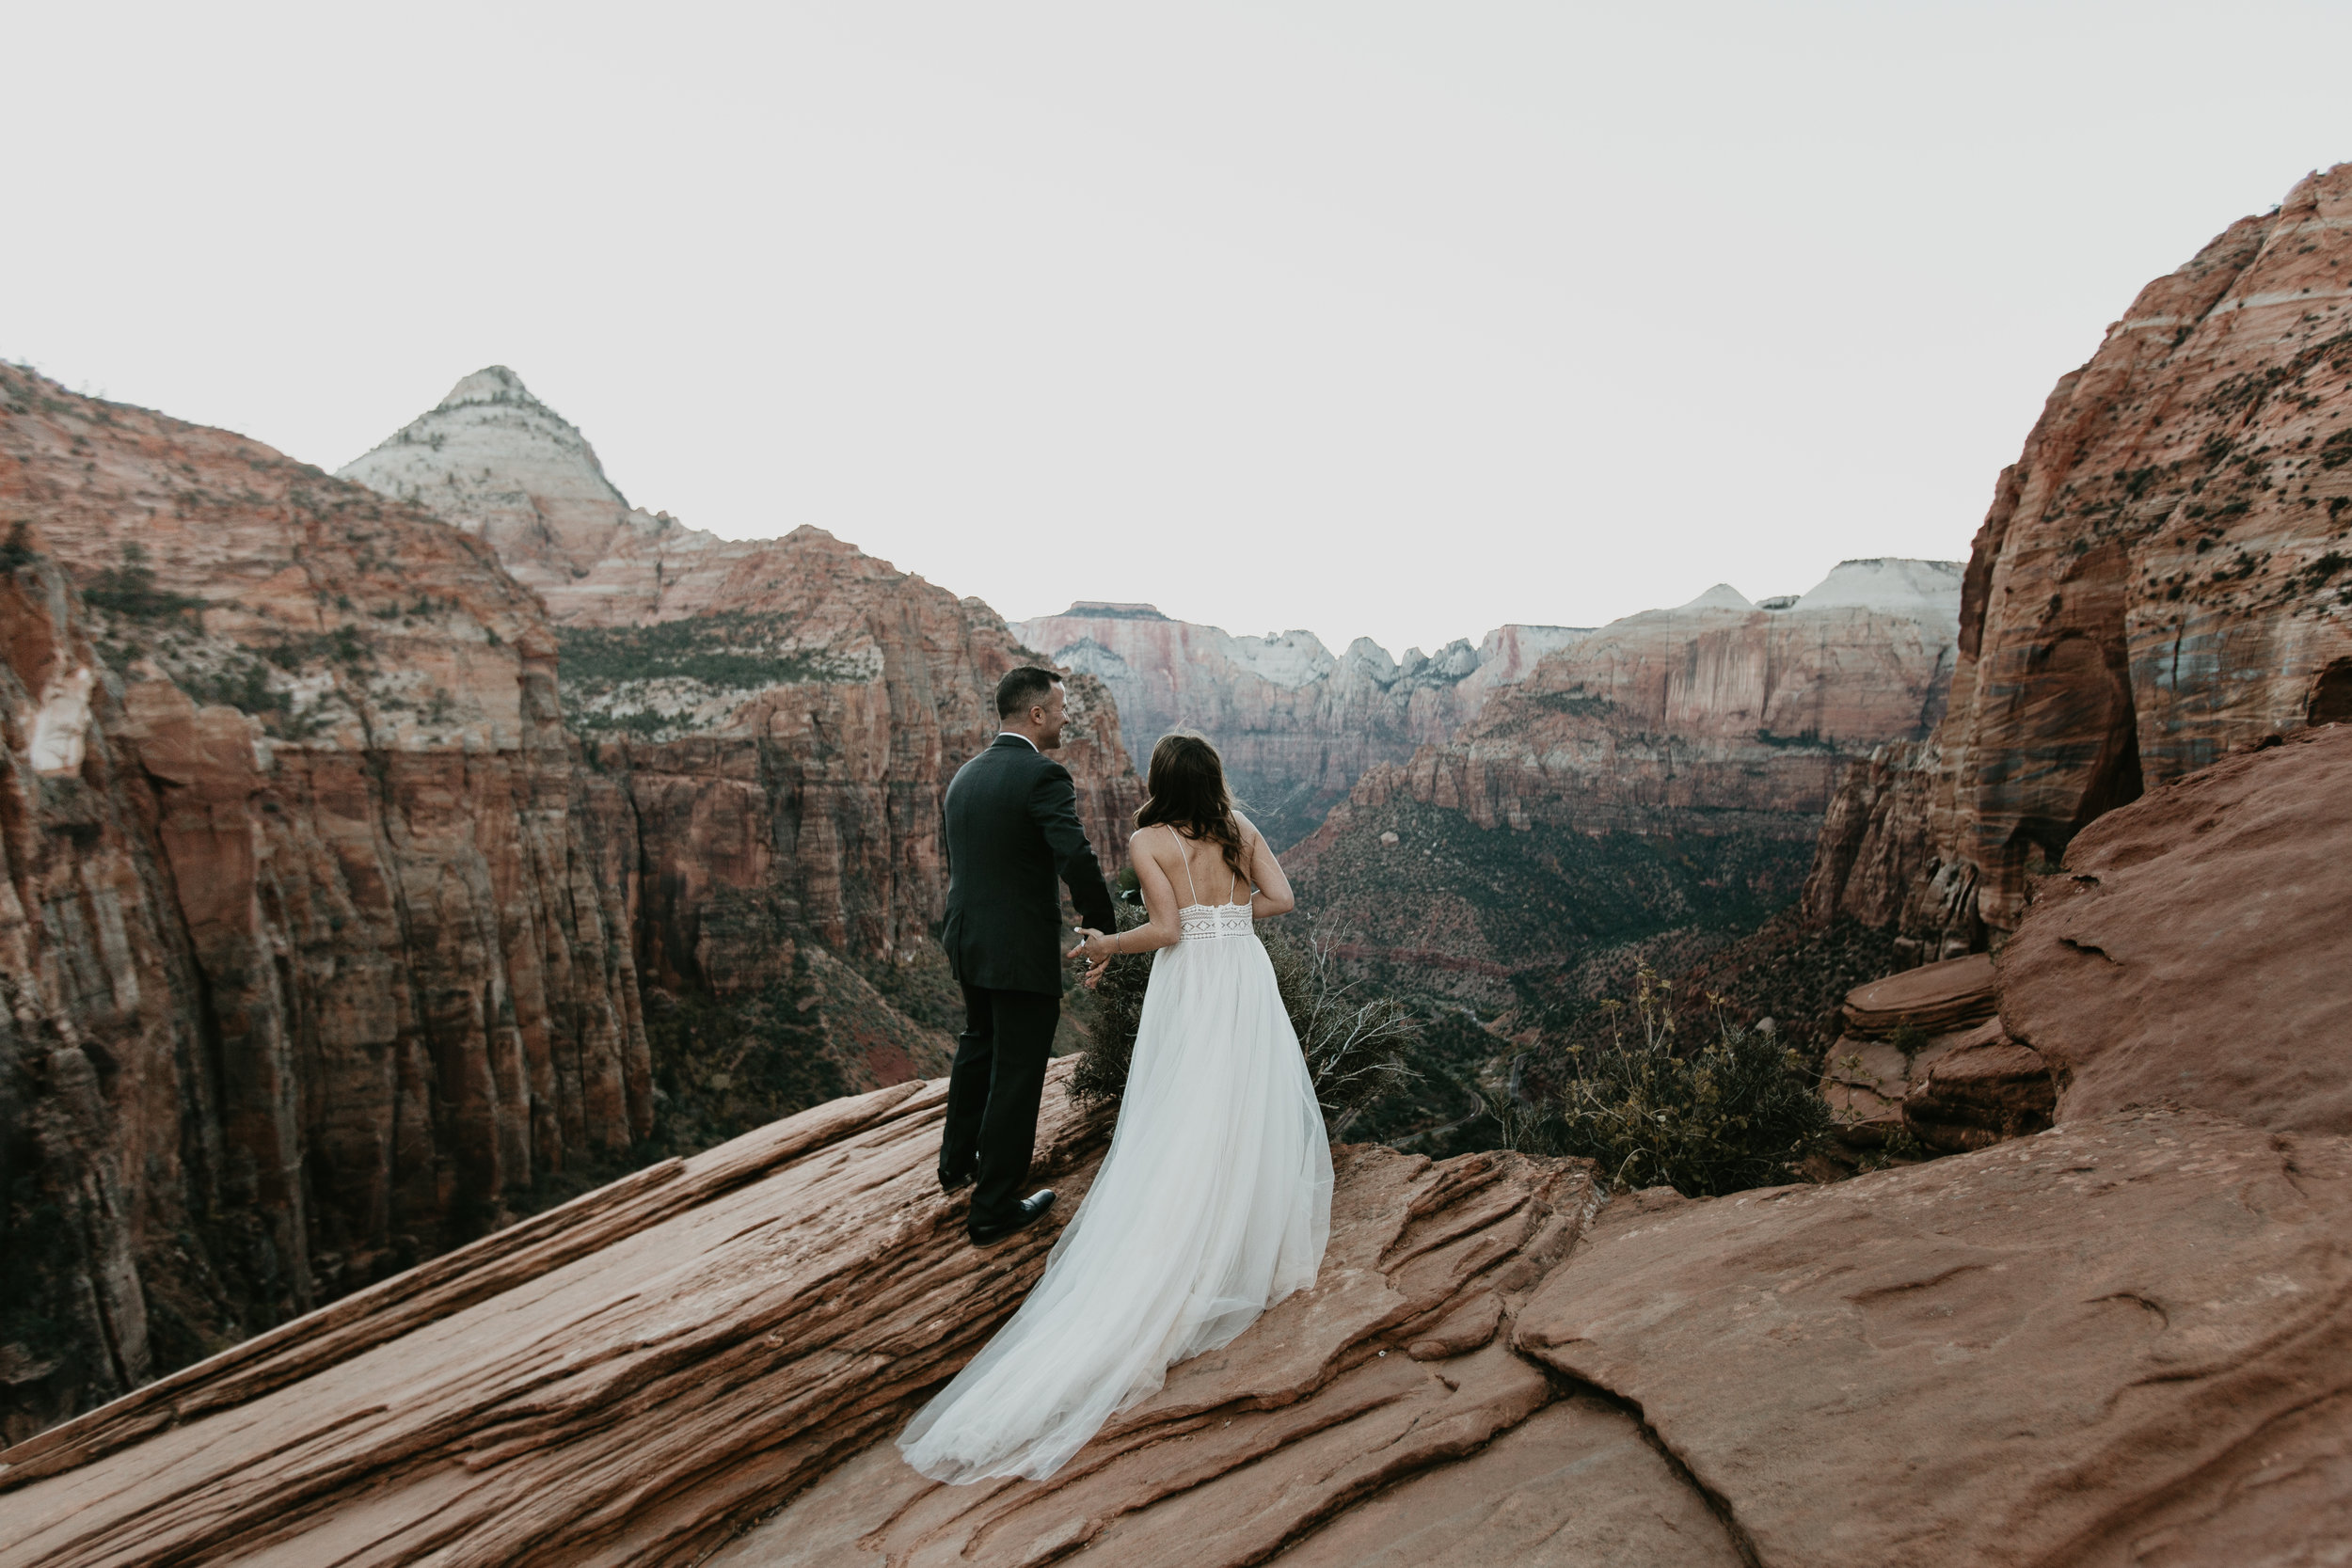 nicole-daacke-photography-zion-national-park-elopement-photographer-canyon-overlook-trail-elope-hiking-adventure-wedding-photos-fall-utah-red-rock-canyon-stgeorge-eloping-photographer-76.jpg